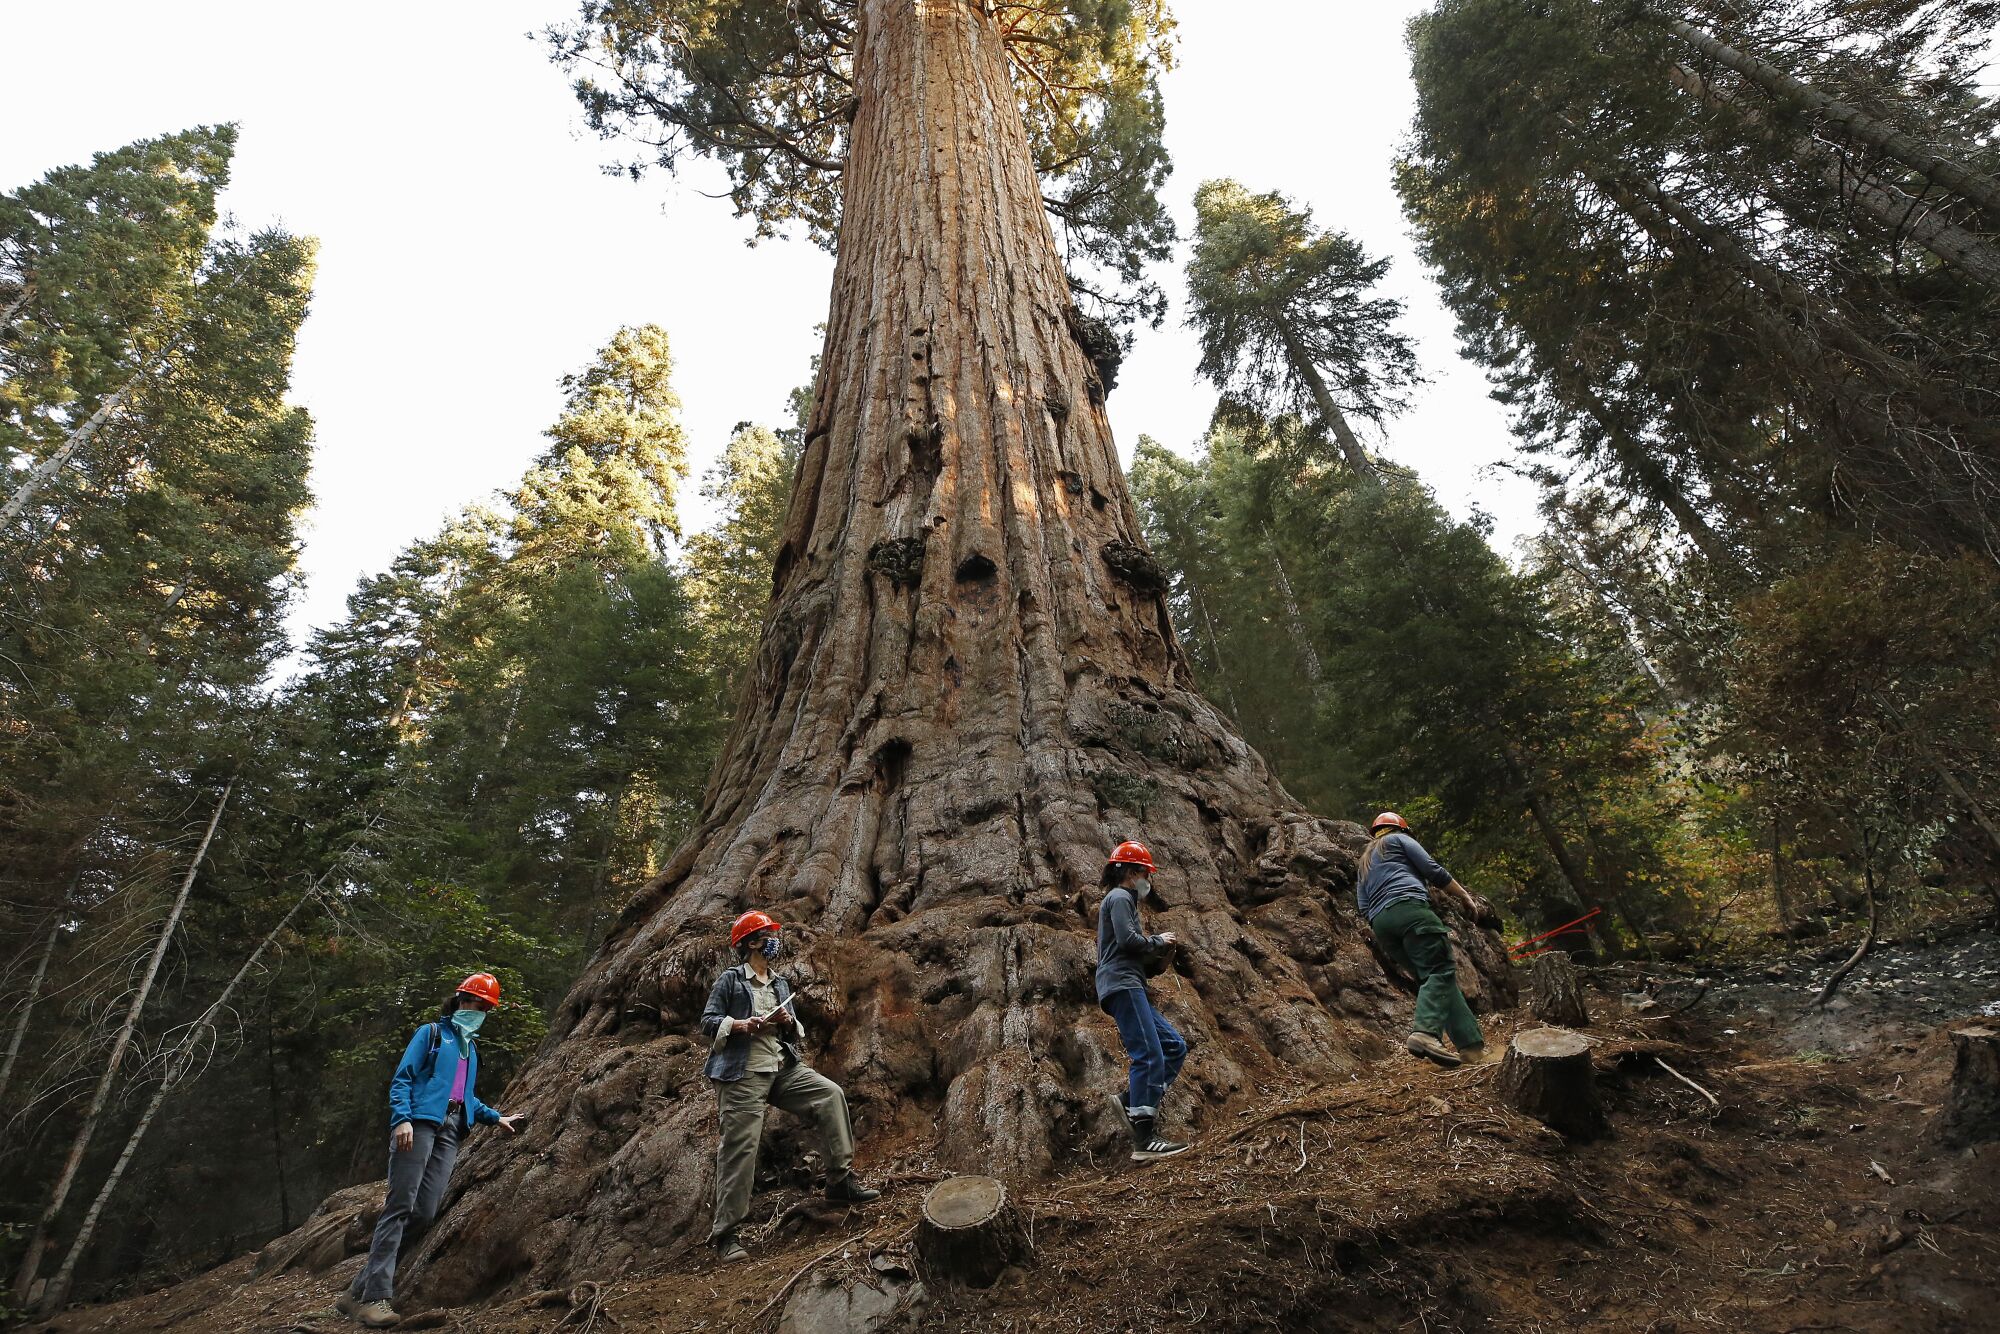 A group of people in orange hard hats walk around the base of a massive tree